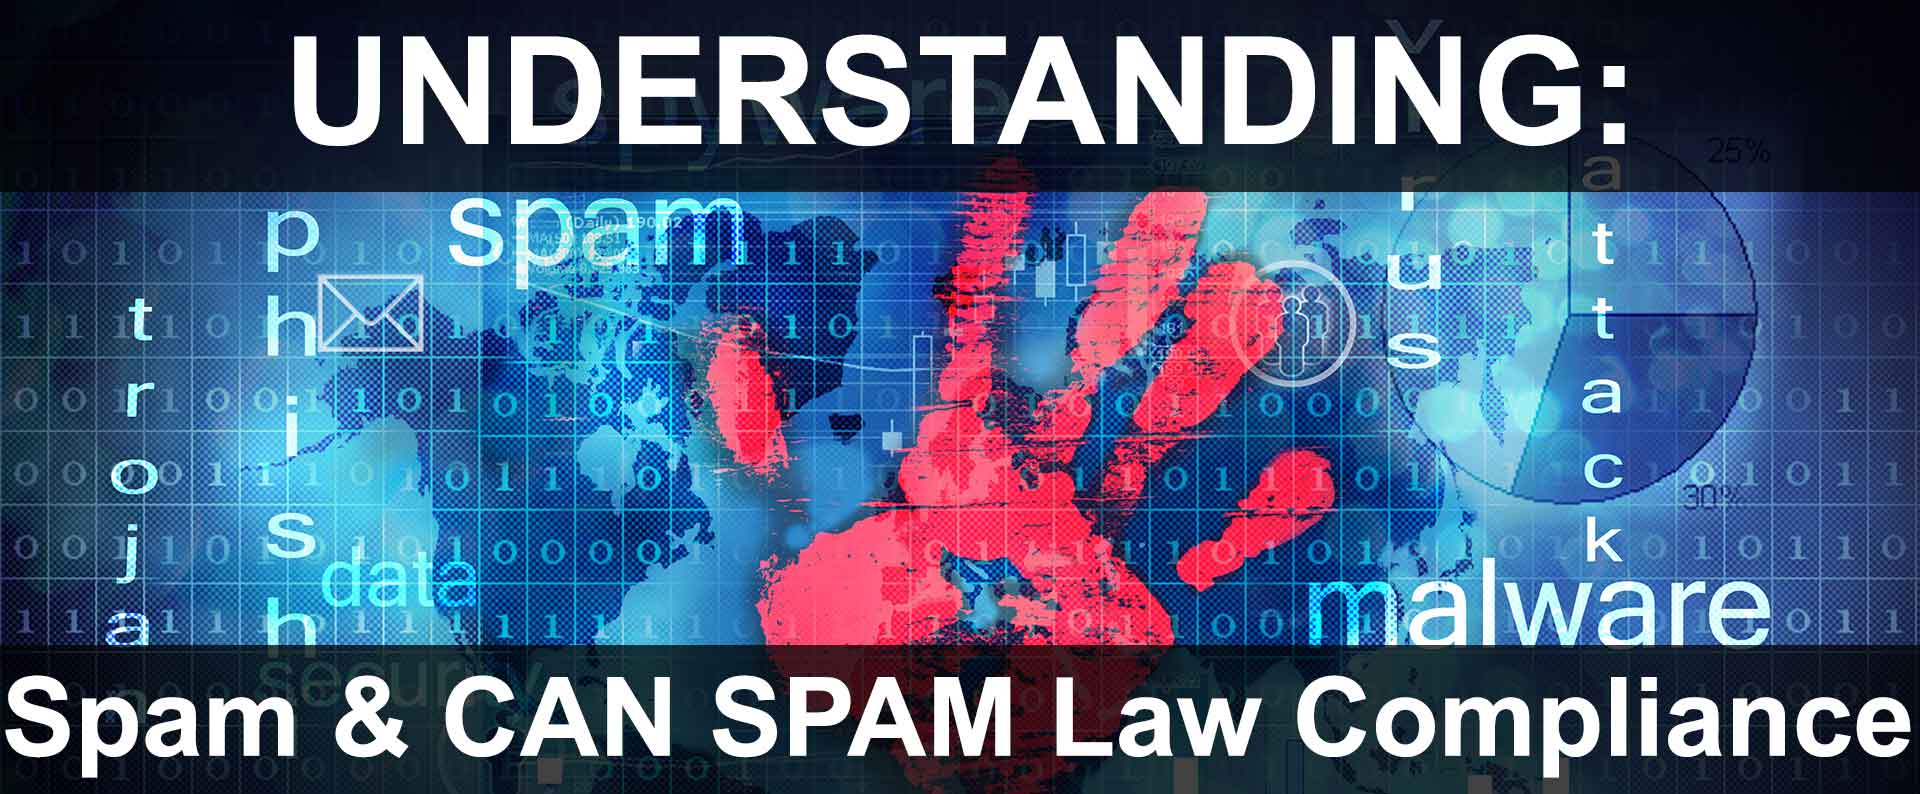 Understanding Spam & CAN SPAM Law Compliance